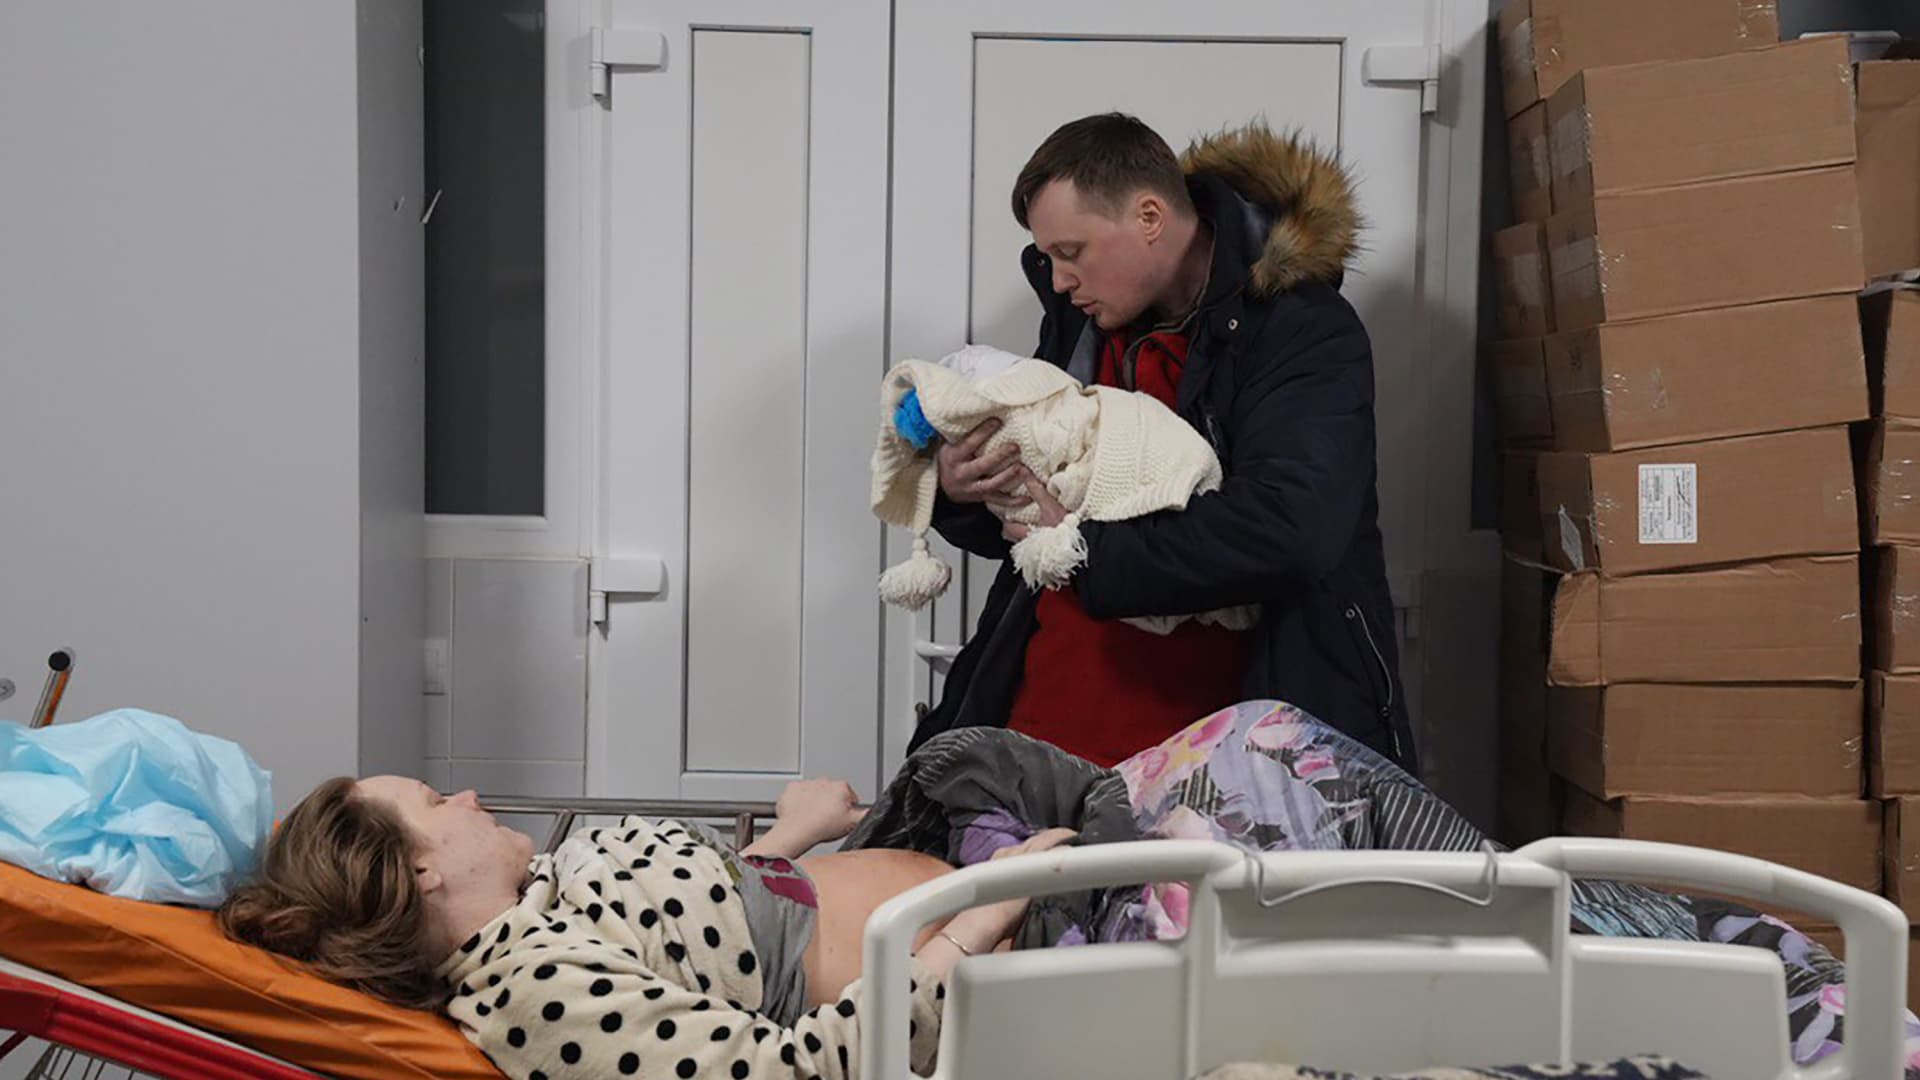 Mariana Vishegirskaya lies in a hospital bed after giving birth to her daughter Veronika, held by her husband Yuri, in Mariupol, Ukraine, Friday, March 11, 2022. Vishegirskaya survived the Russian airstrike on a children's and maternity hospital in Mariupol last Wednesday.